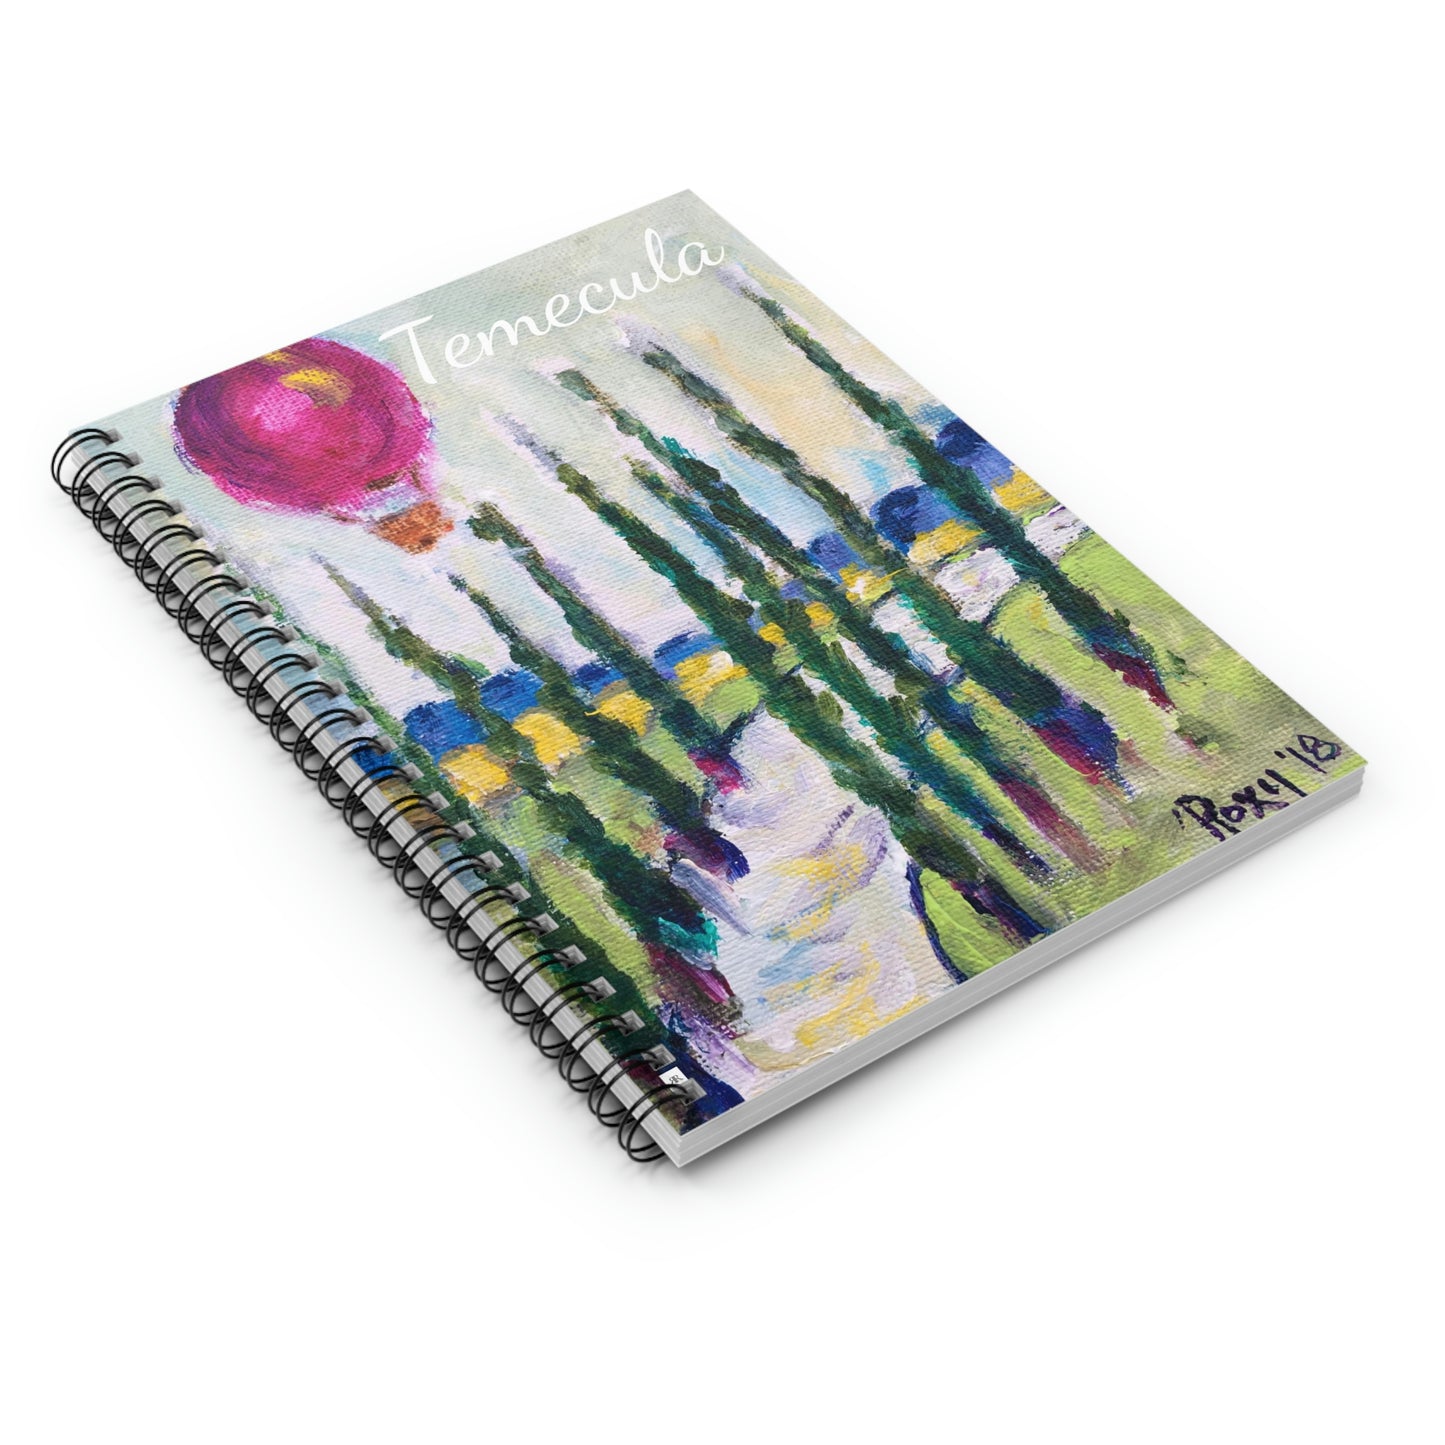 Wine Country with Balloon "Temecula" Spiral Notebook